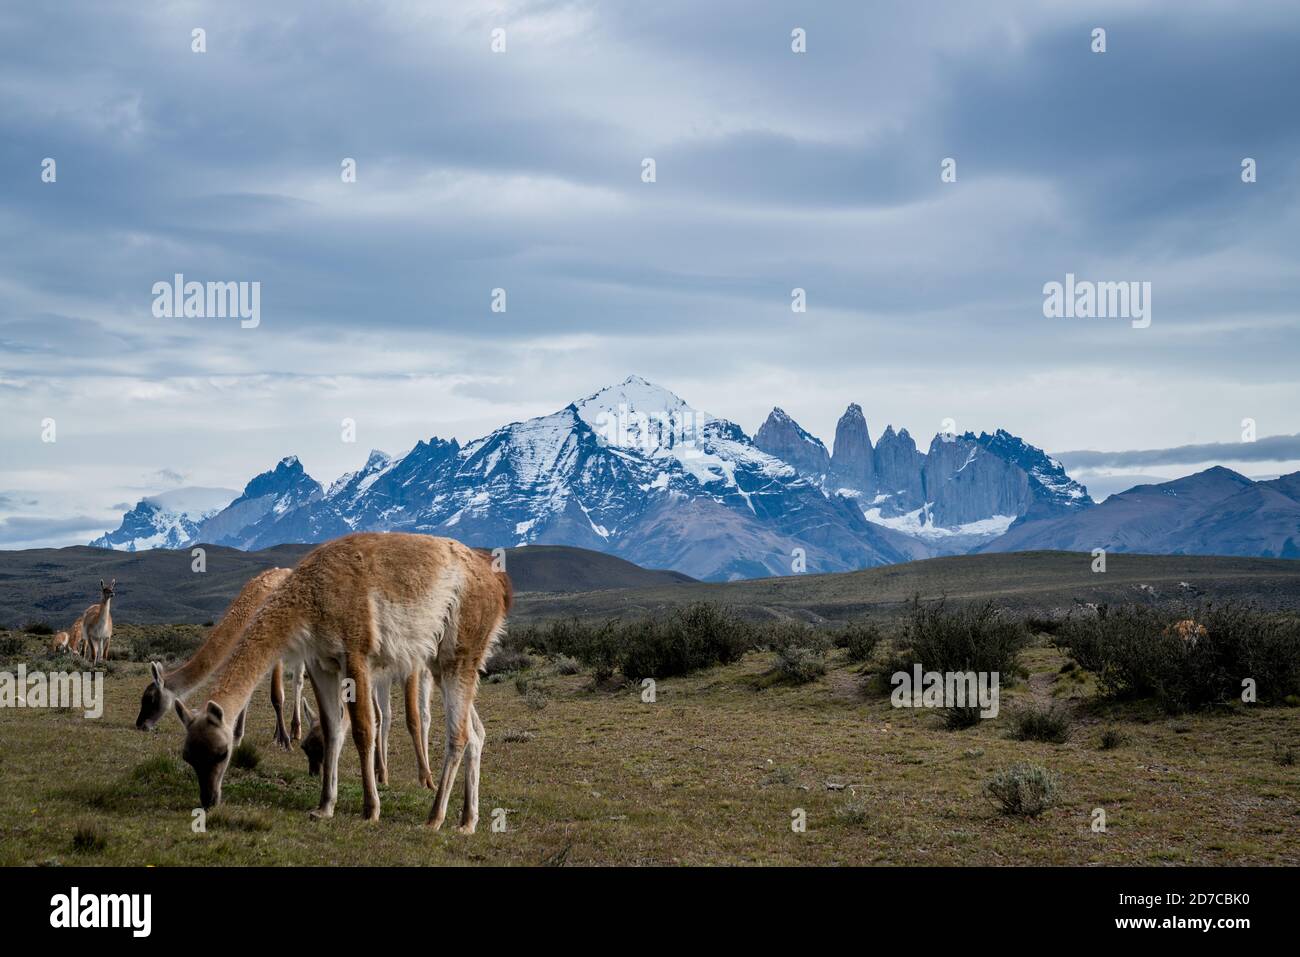 Patagonian landscapes Stock Photo